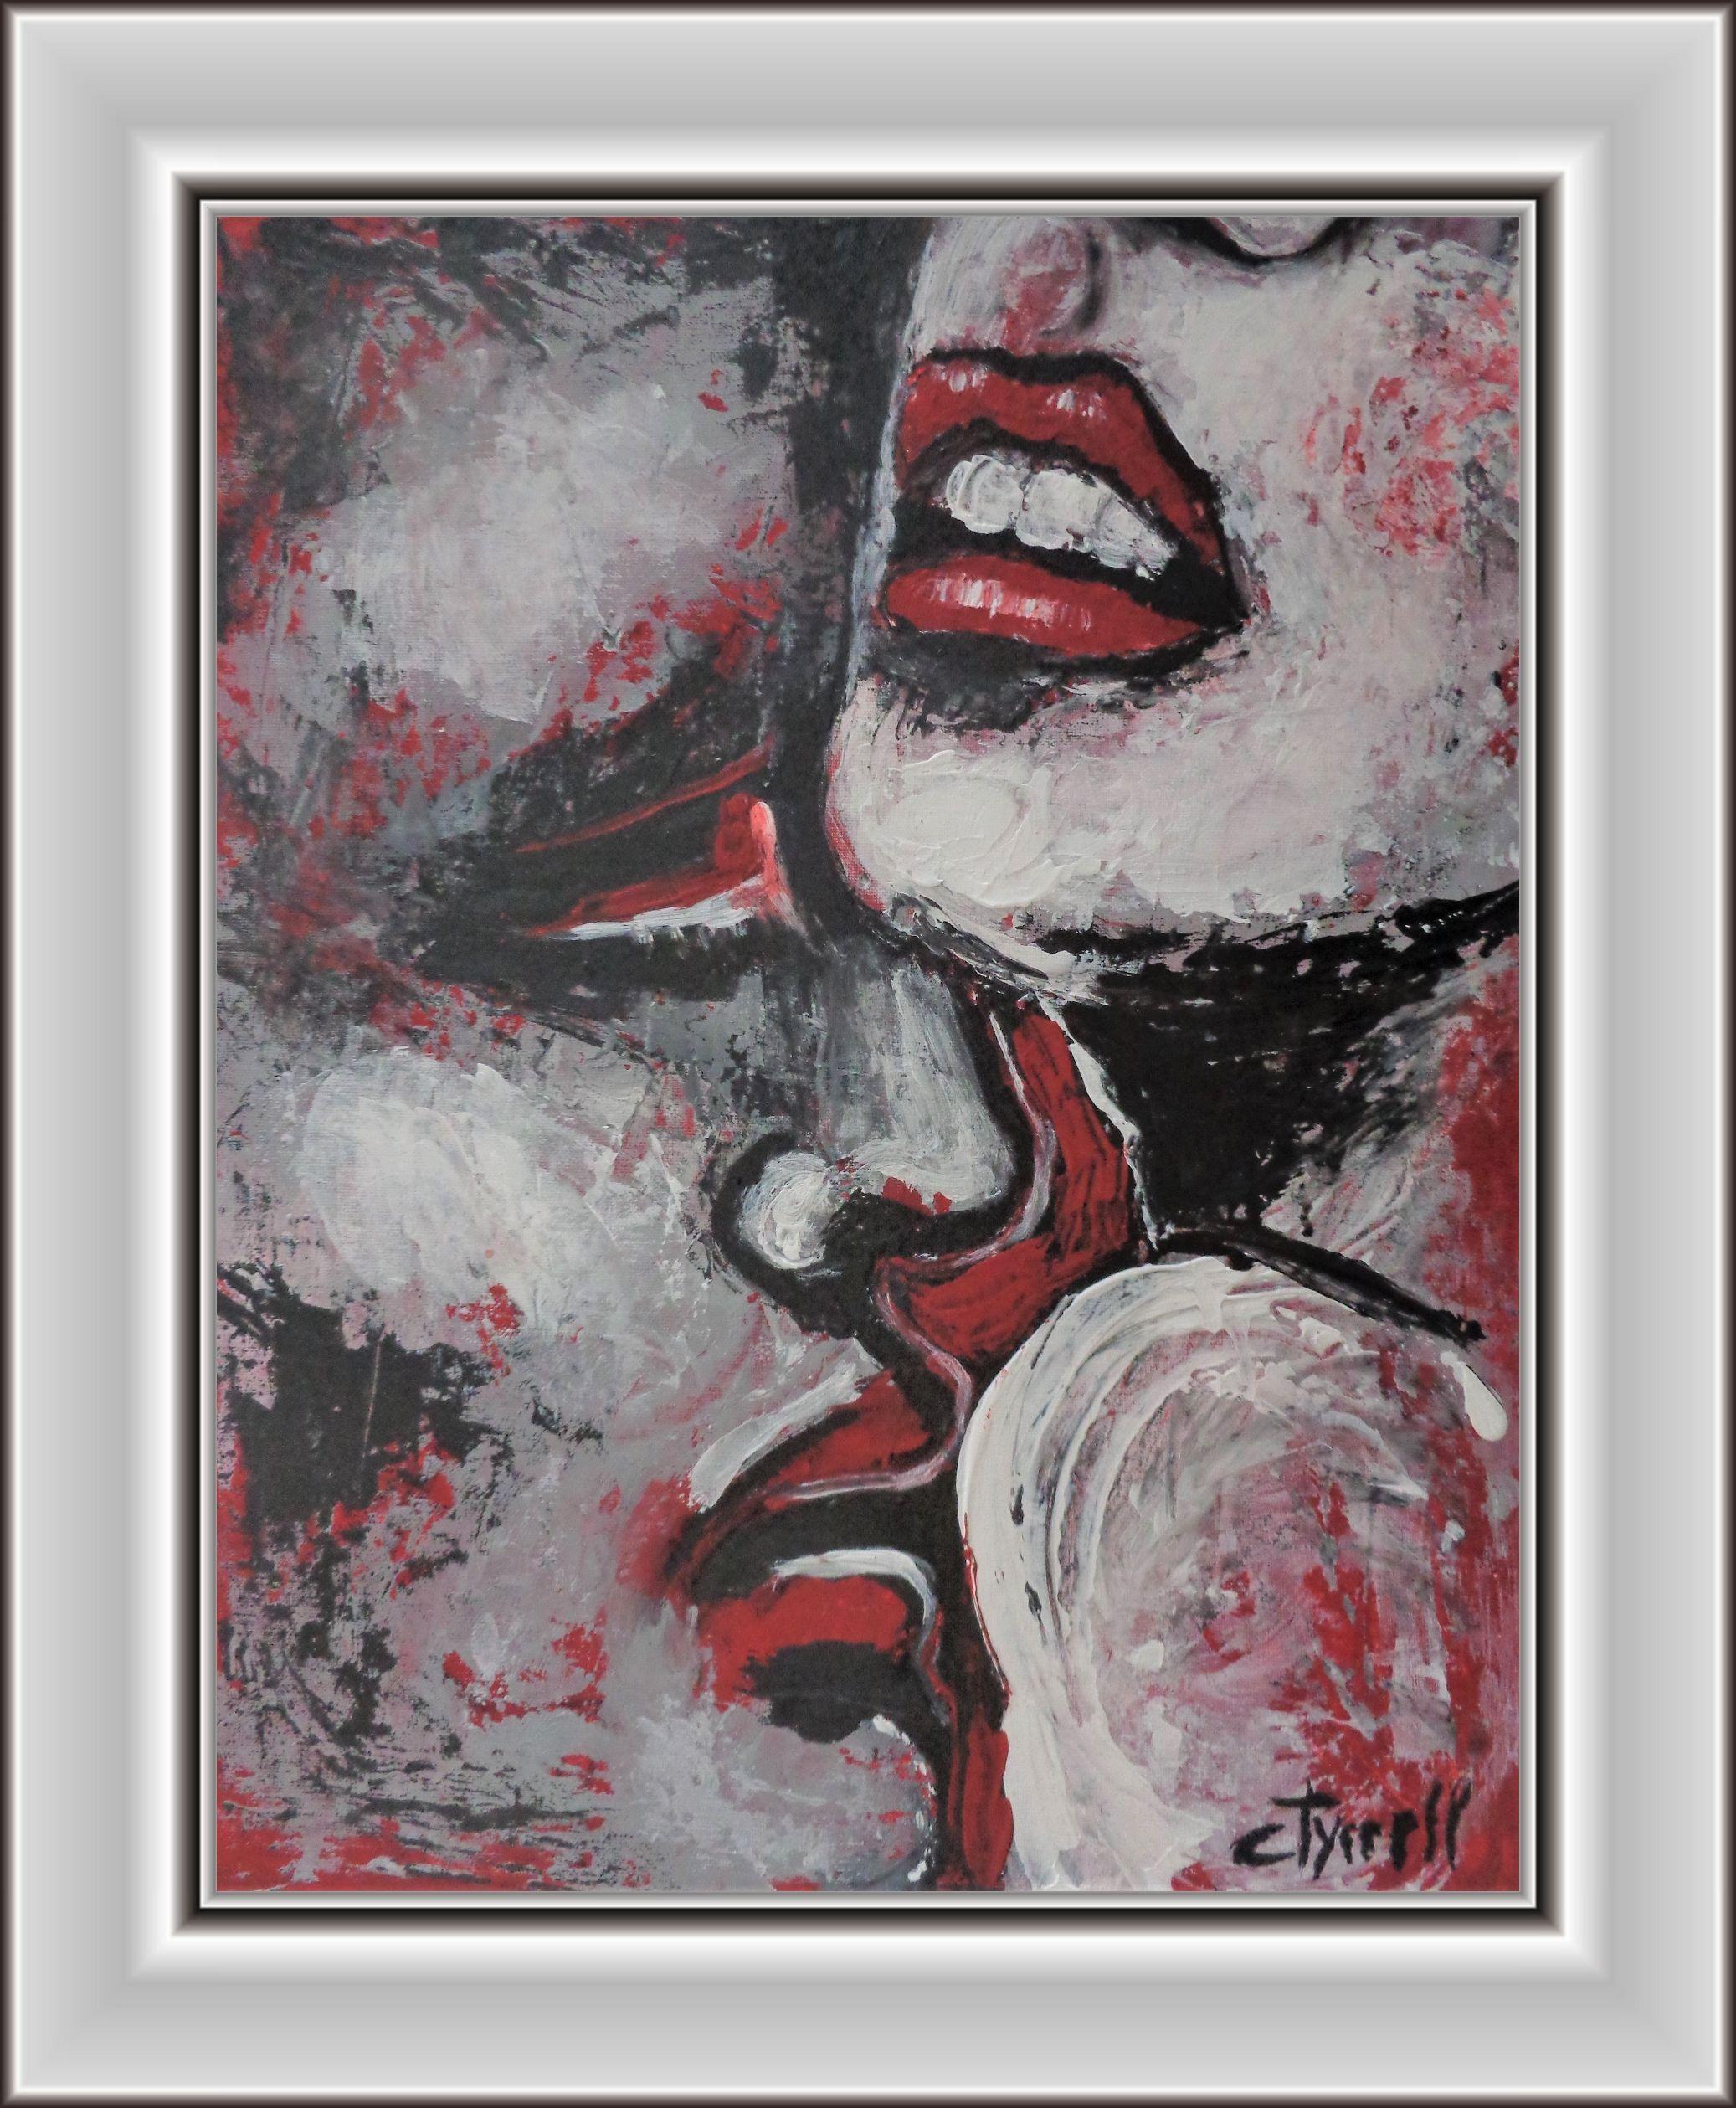 Original figurative textured acrylic paintings on canvas board, unframed. Third in the new series 